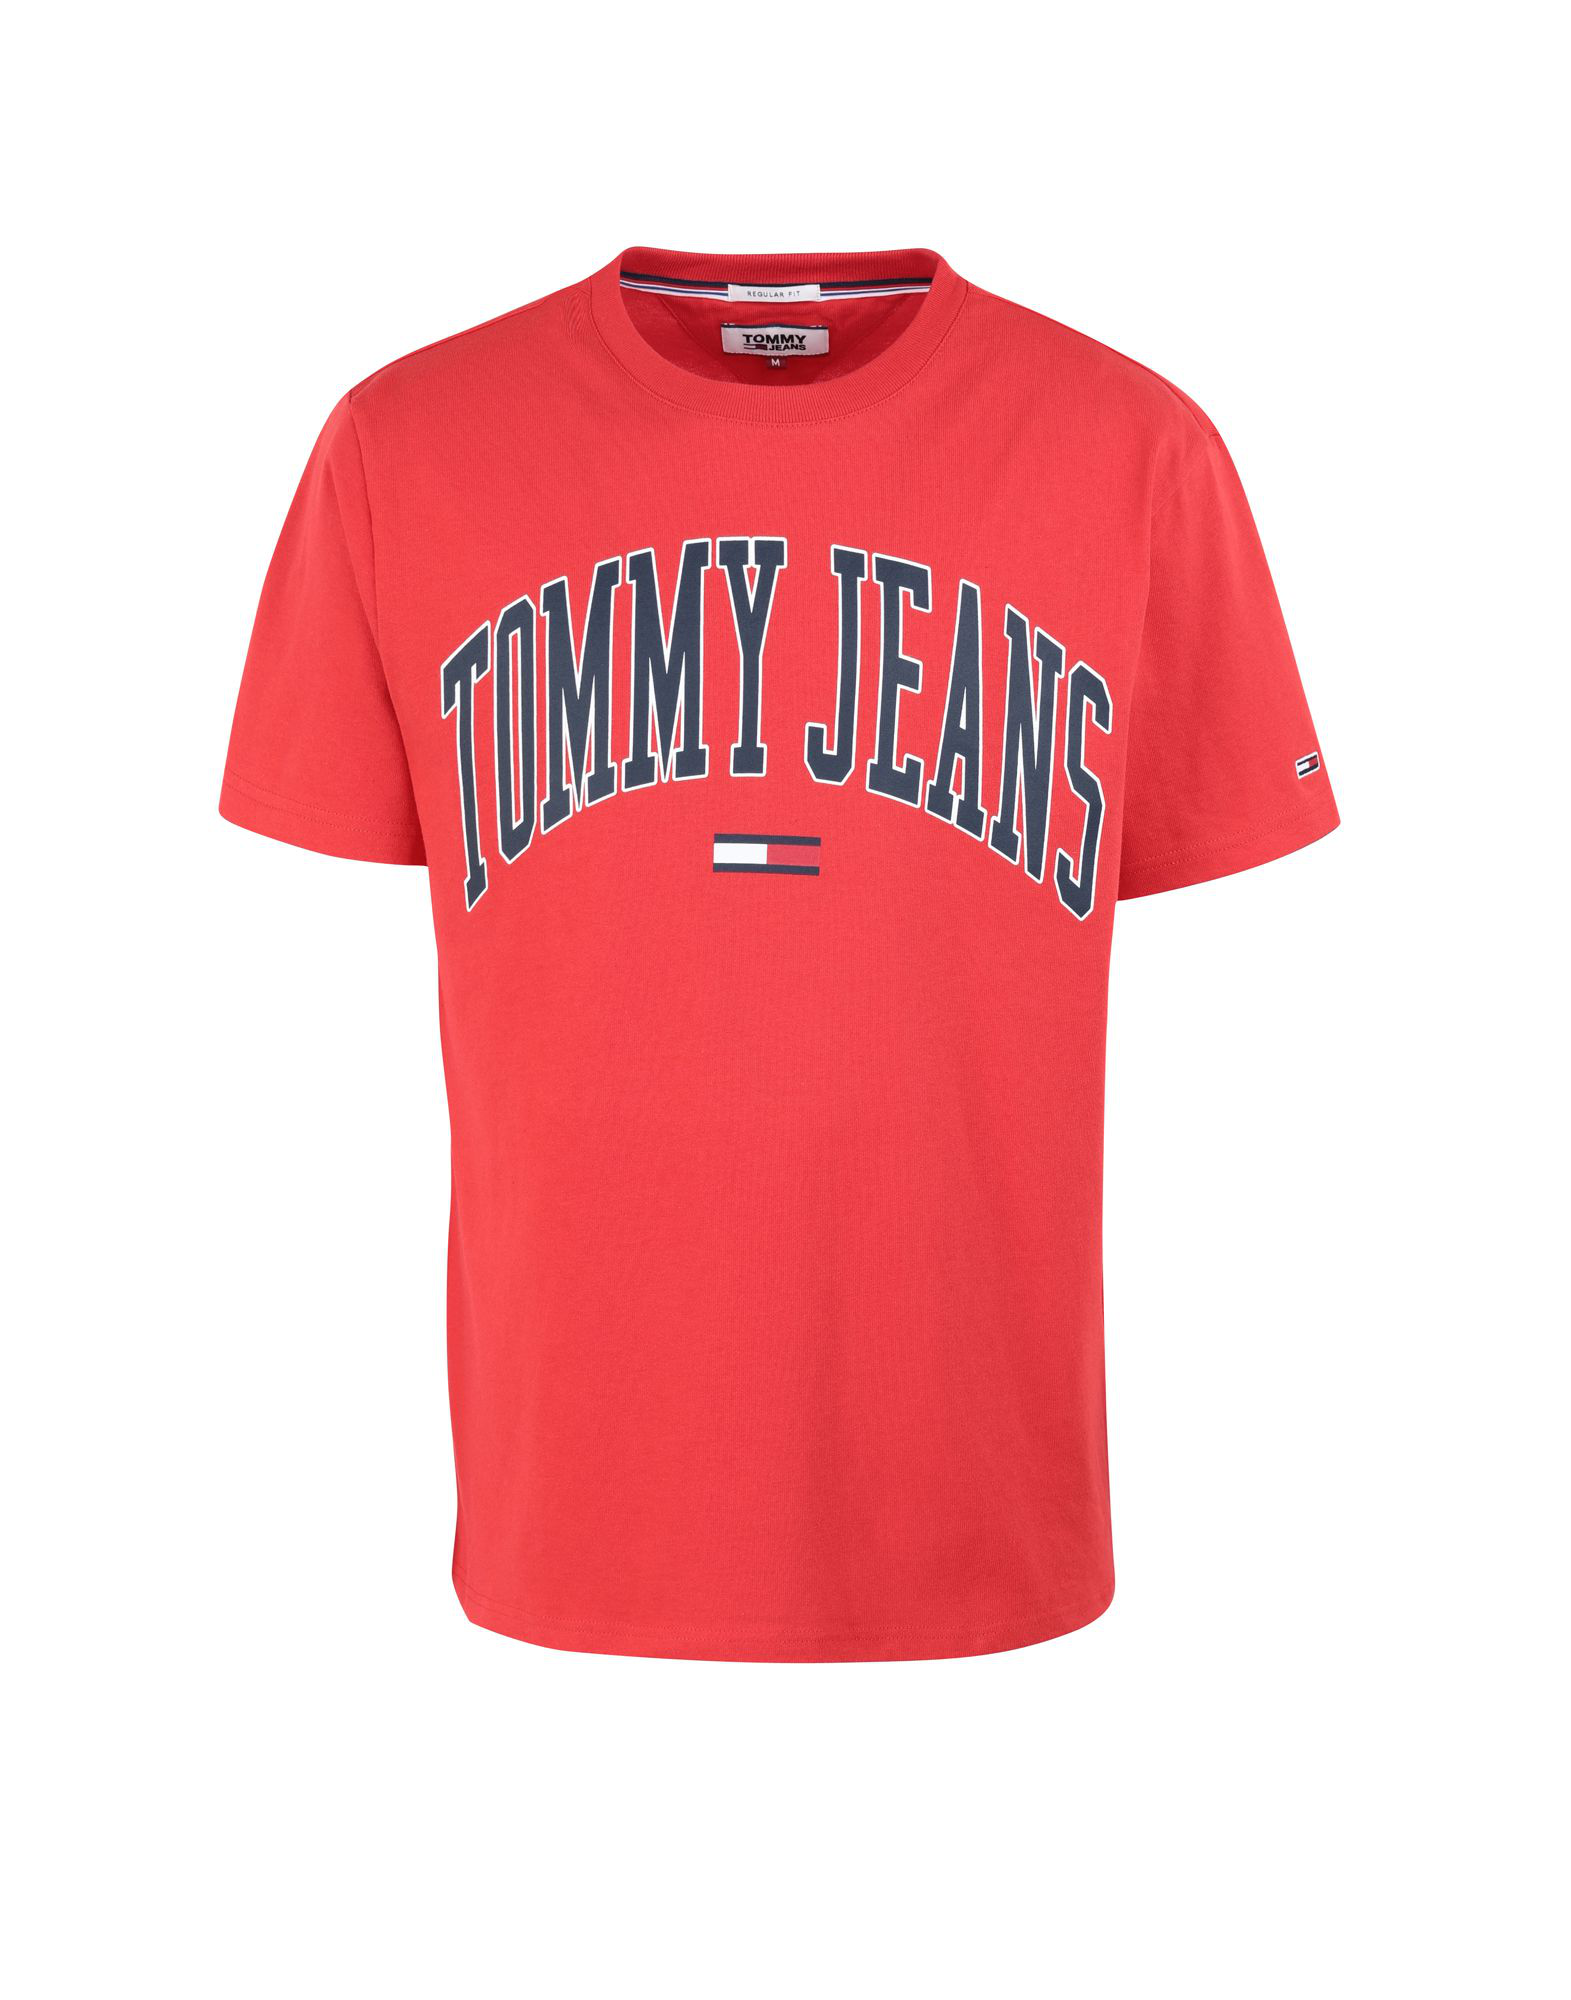 tommy jeans red t shirt